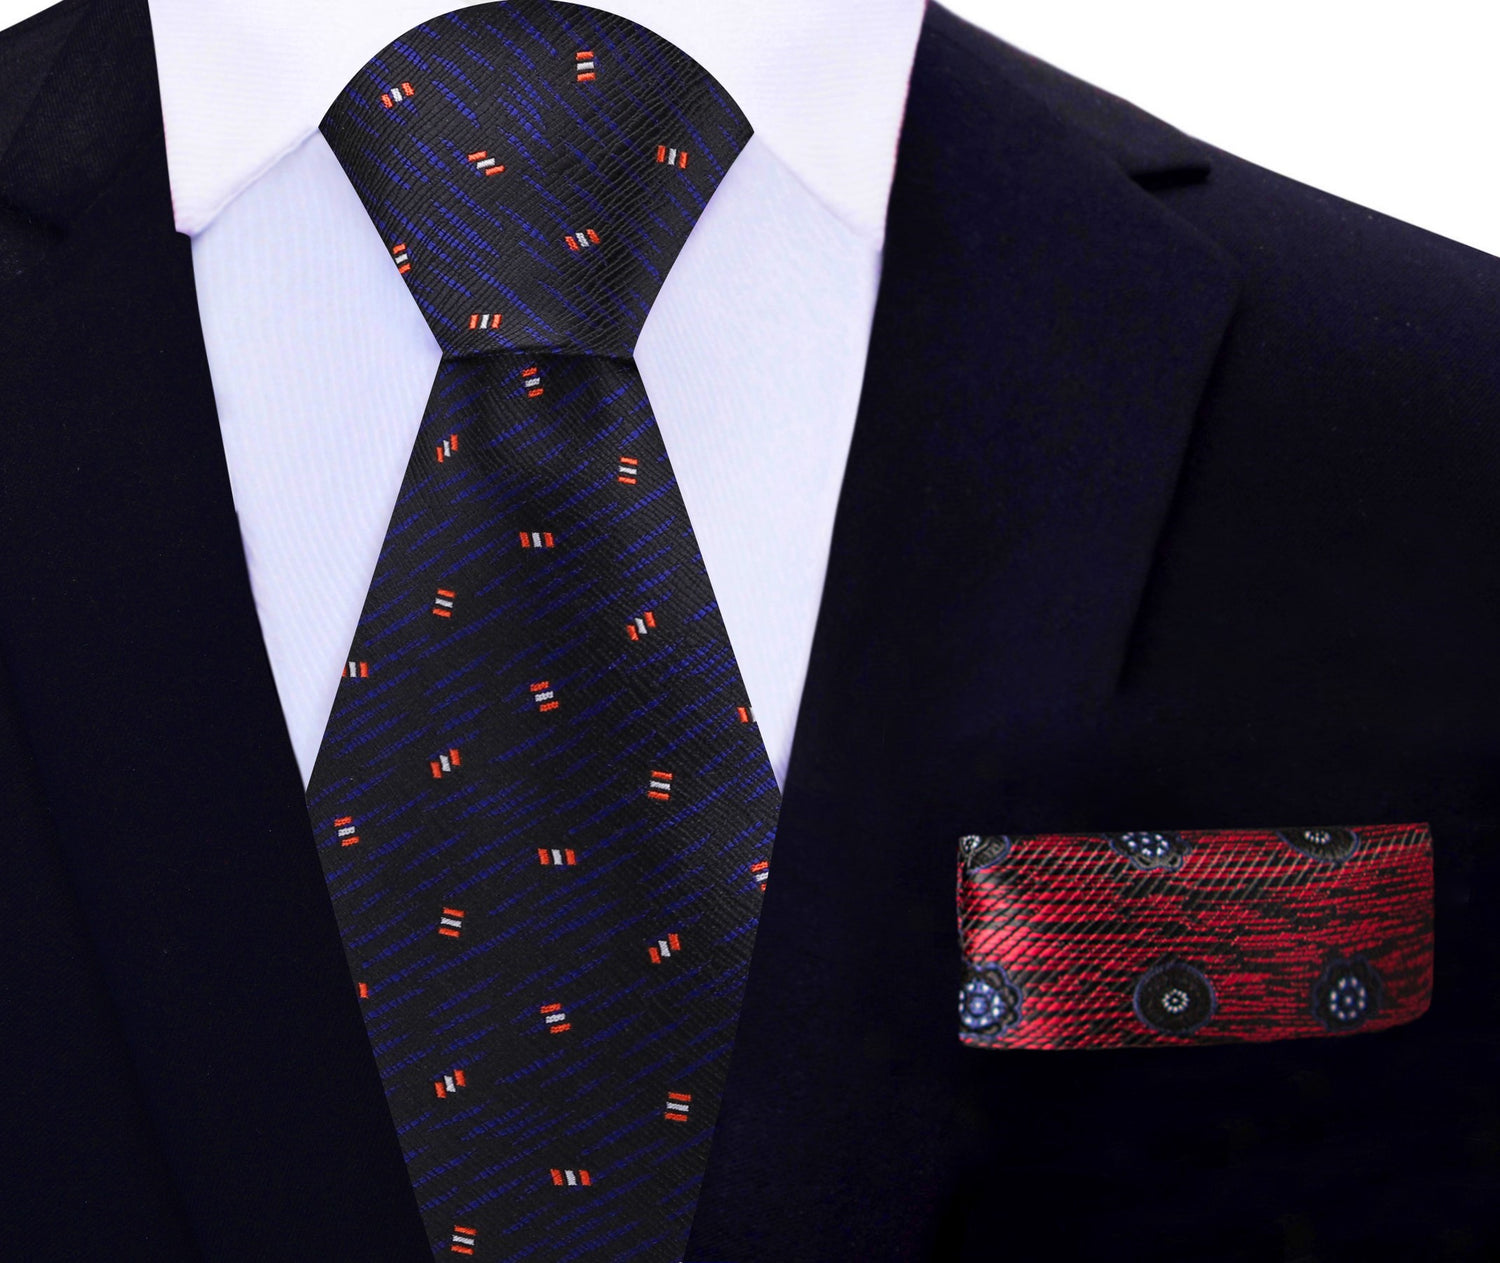 Black, Dark Indigo, Red, Abstract Tie and Accenting Red Geometric Square